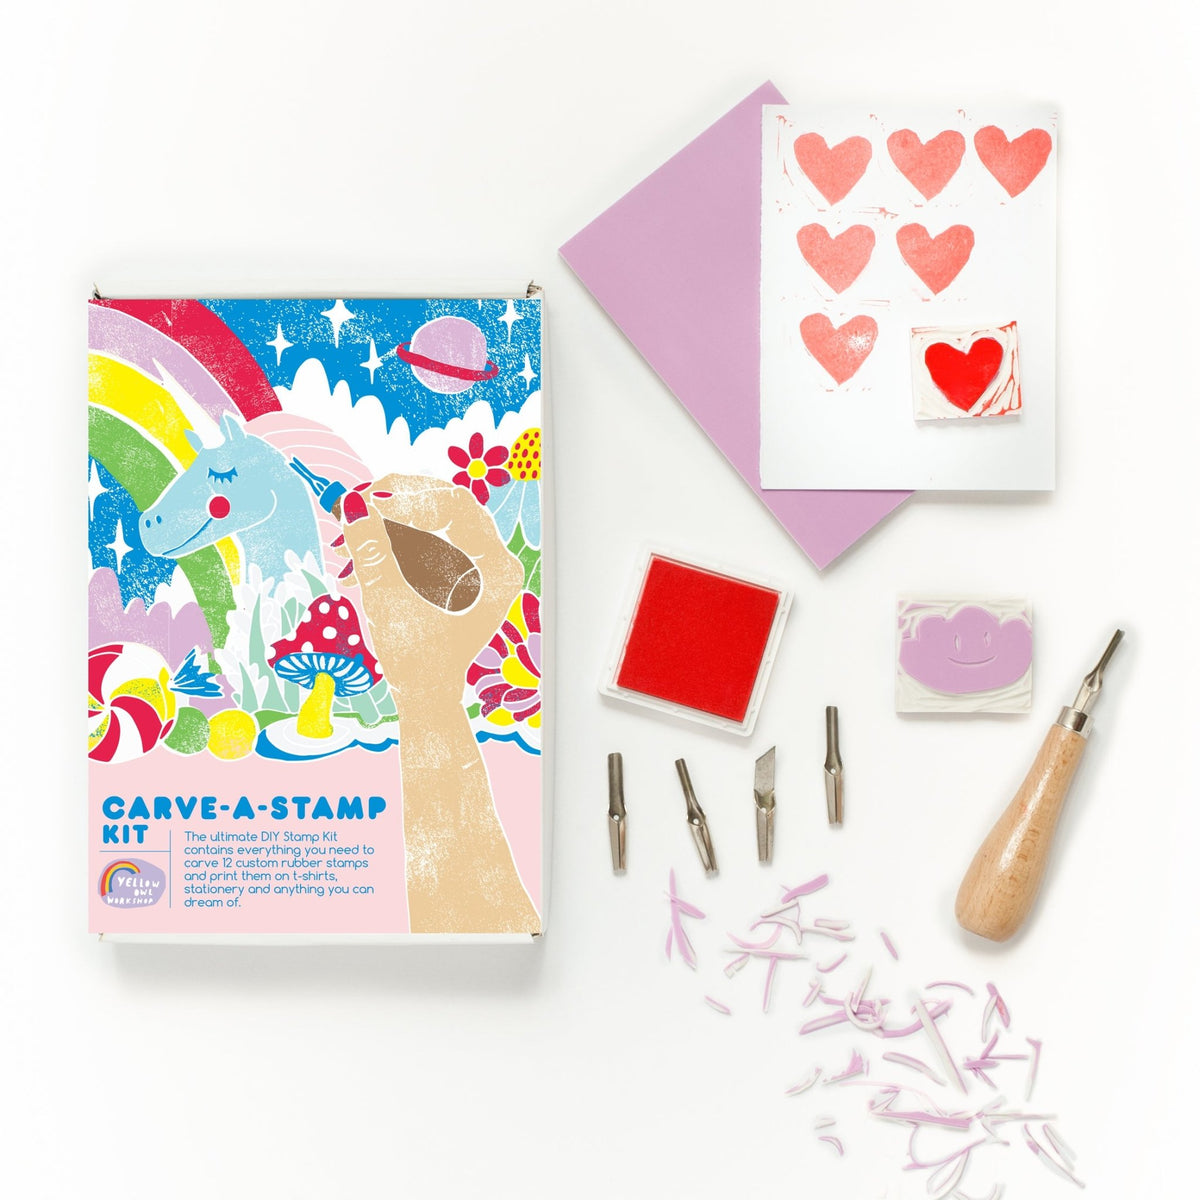 Carve-A-Stamp Kit - Yellow Owl Workshop